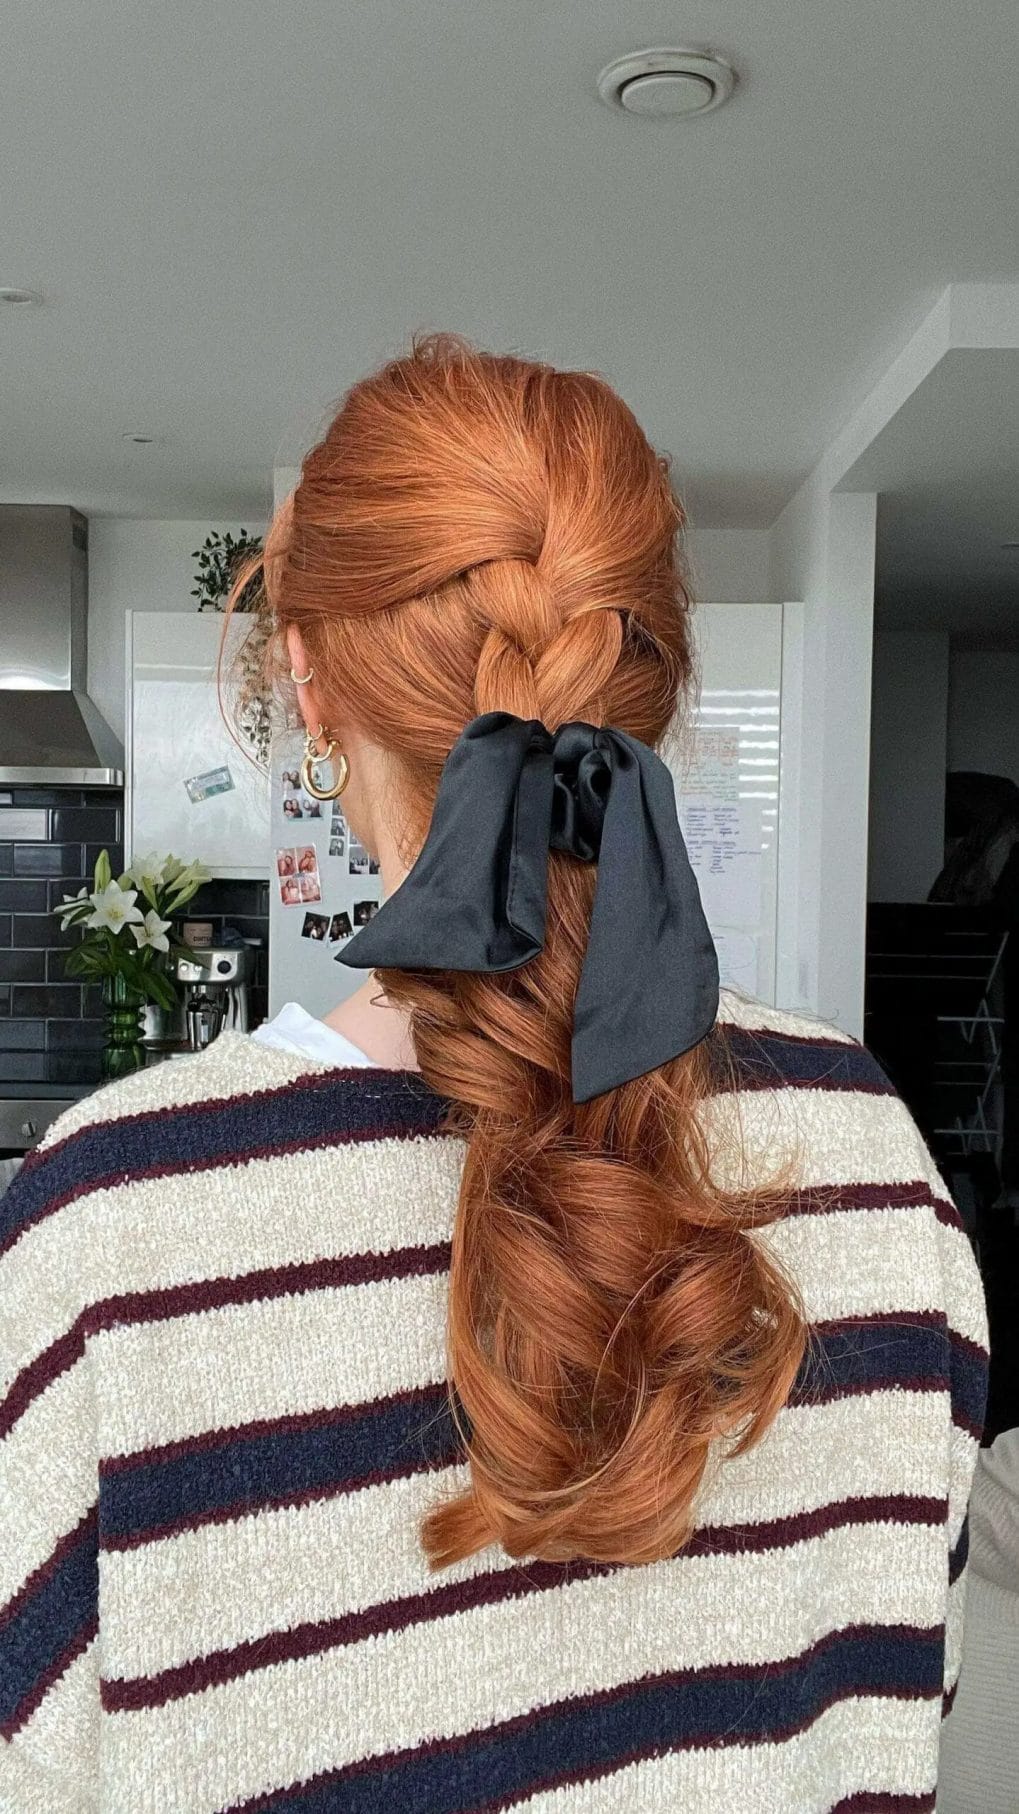 Sophisticated braided copper ponytail with a chic black bow for a birthday celebration.